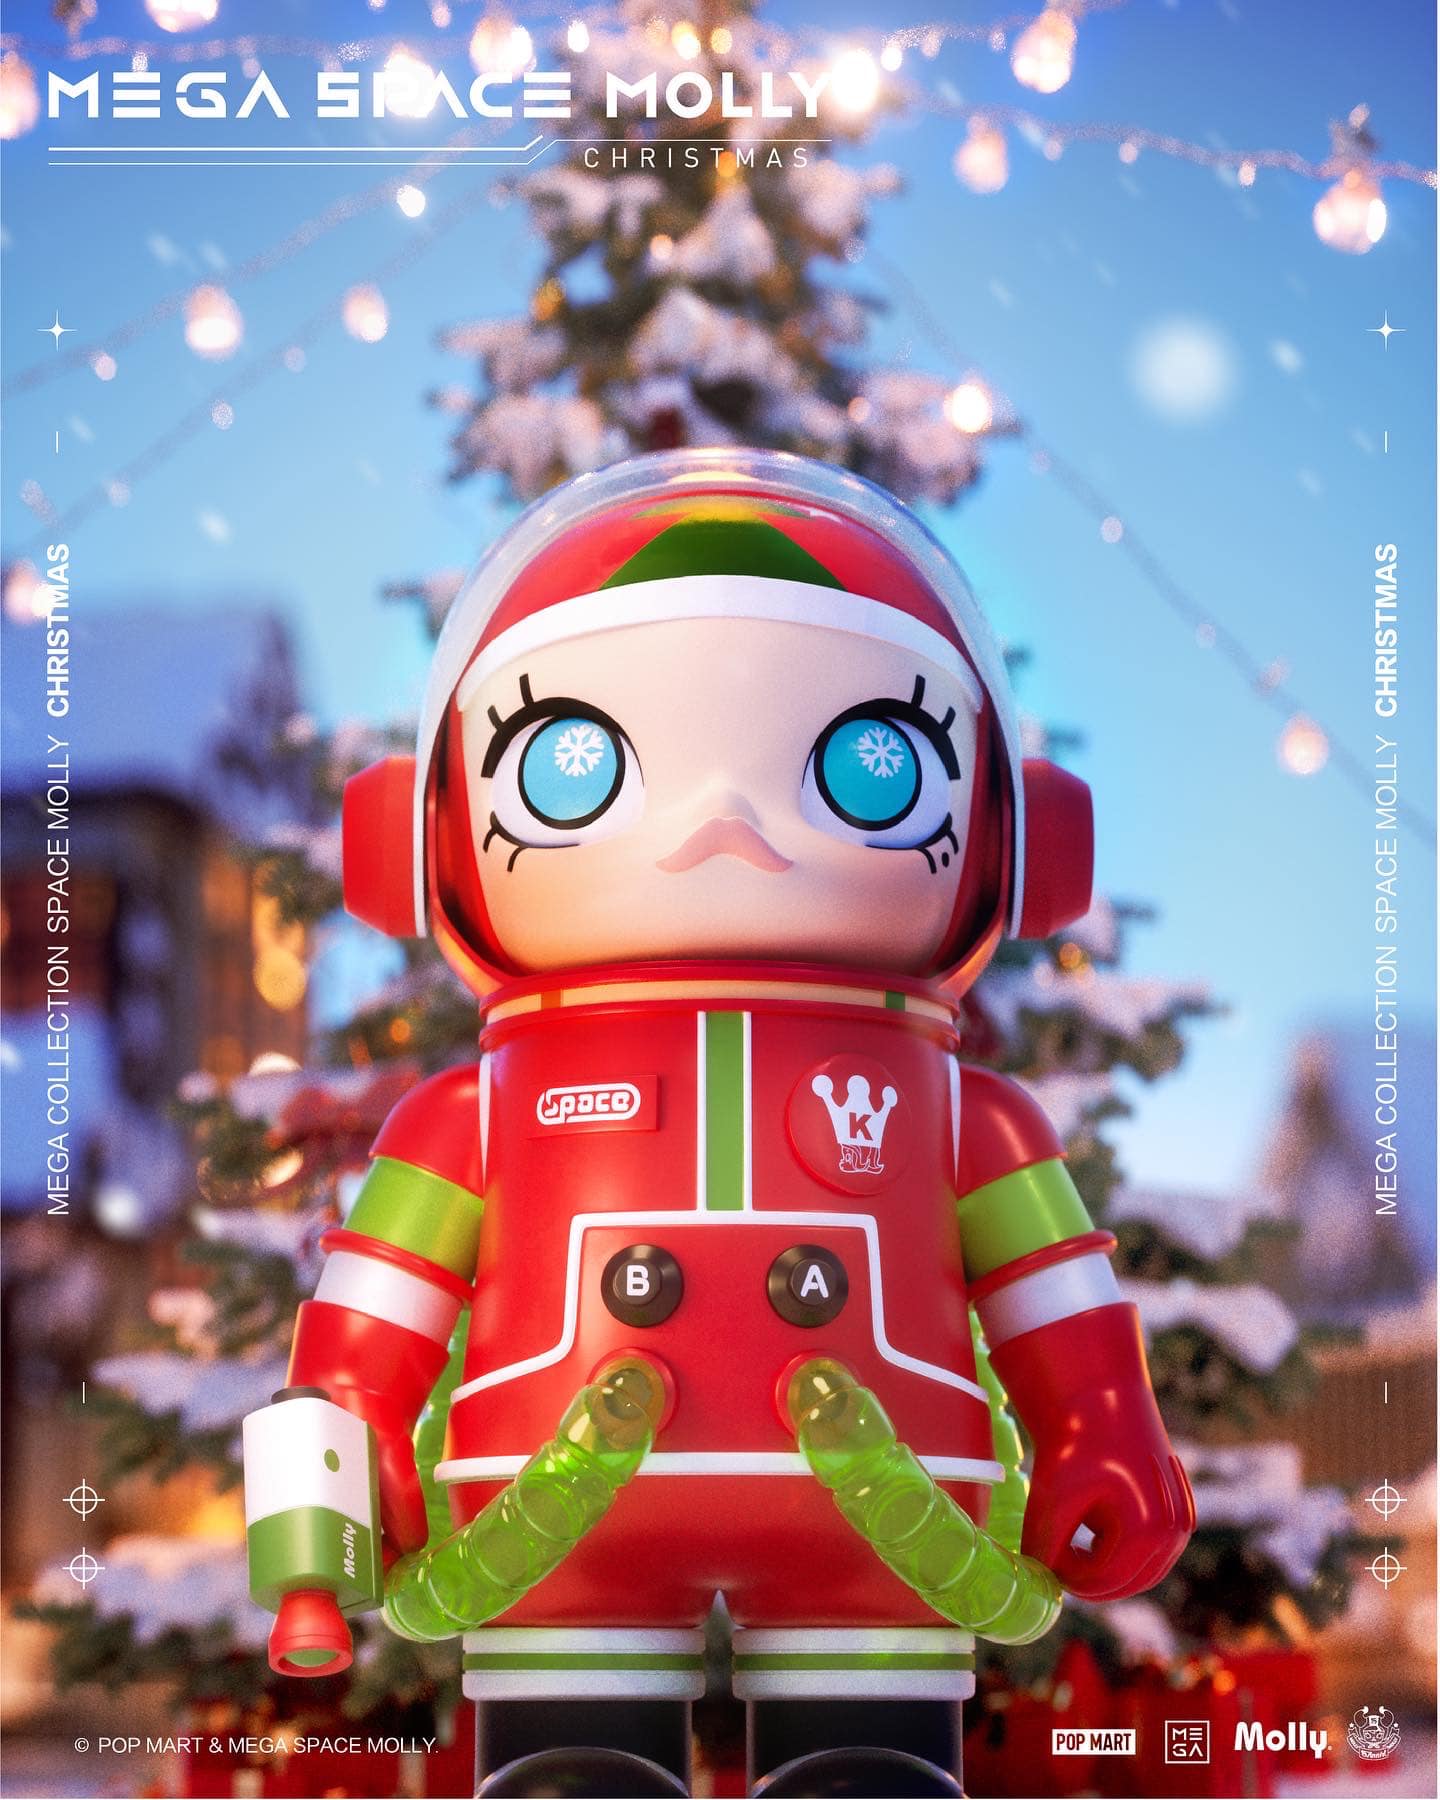 POP MART x Kenny Wong's Mega Space Molly: Christmas - The Toy 